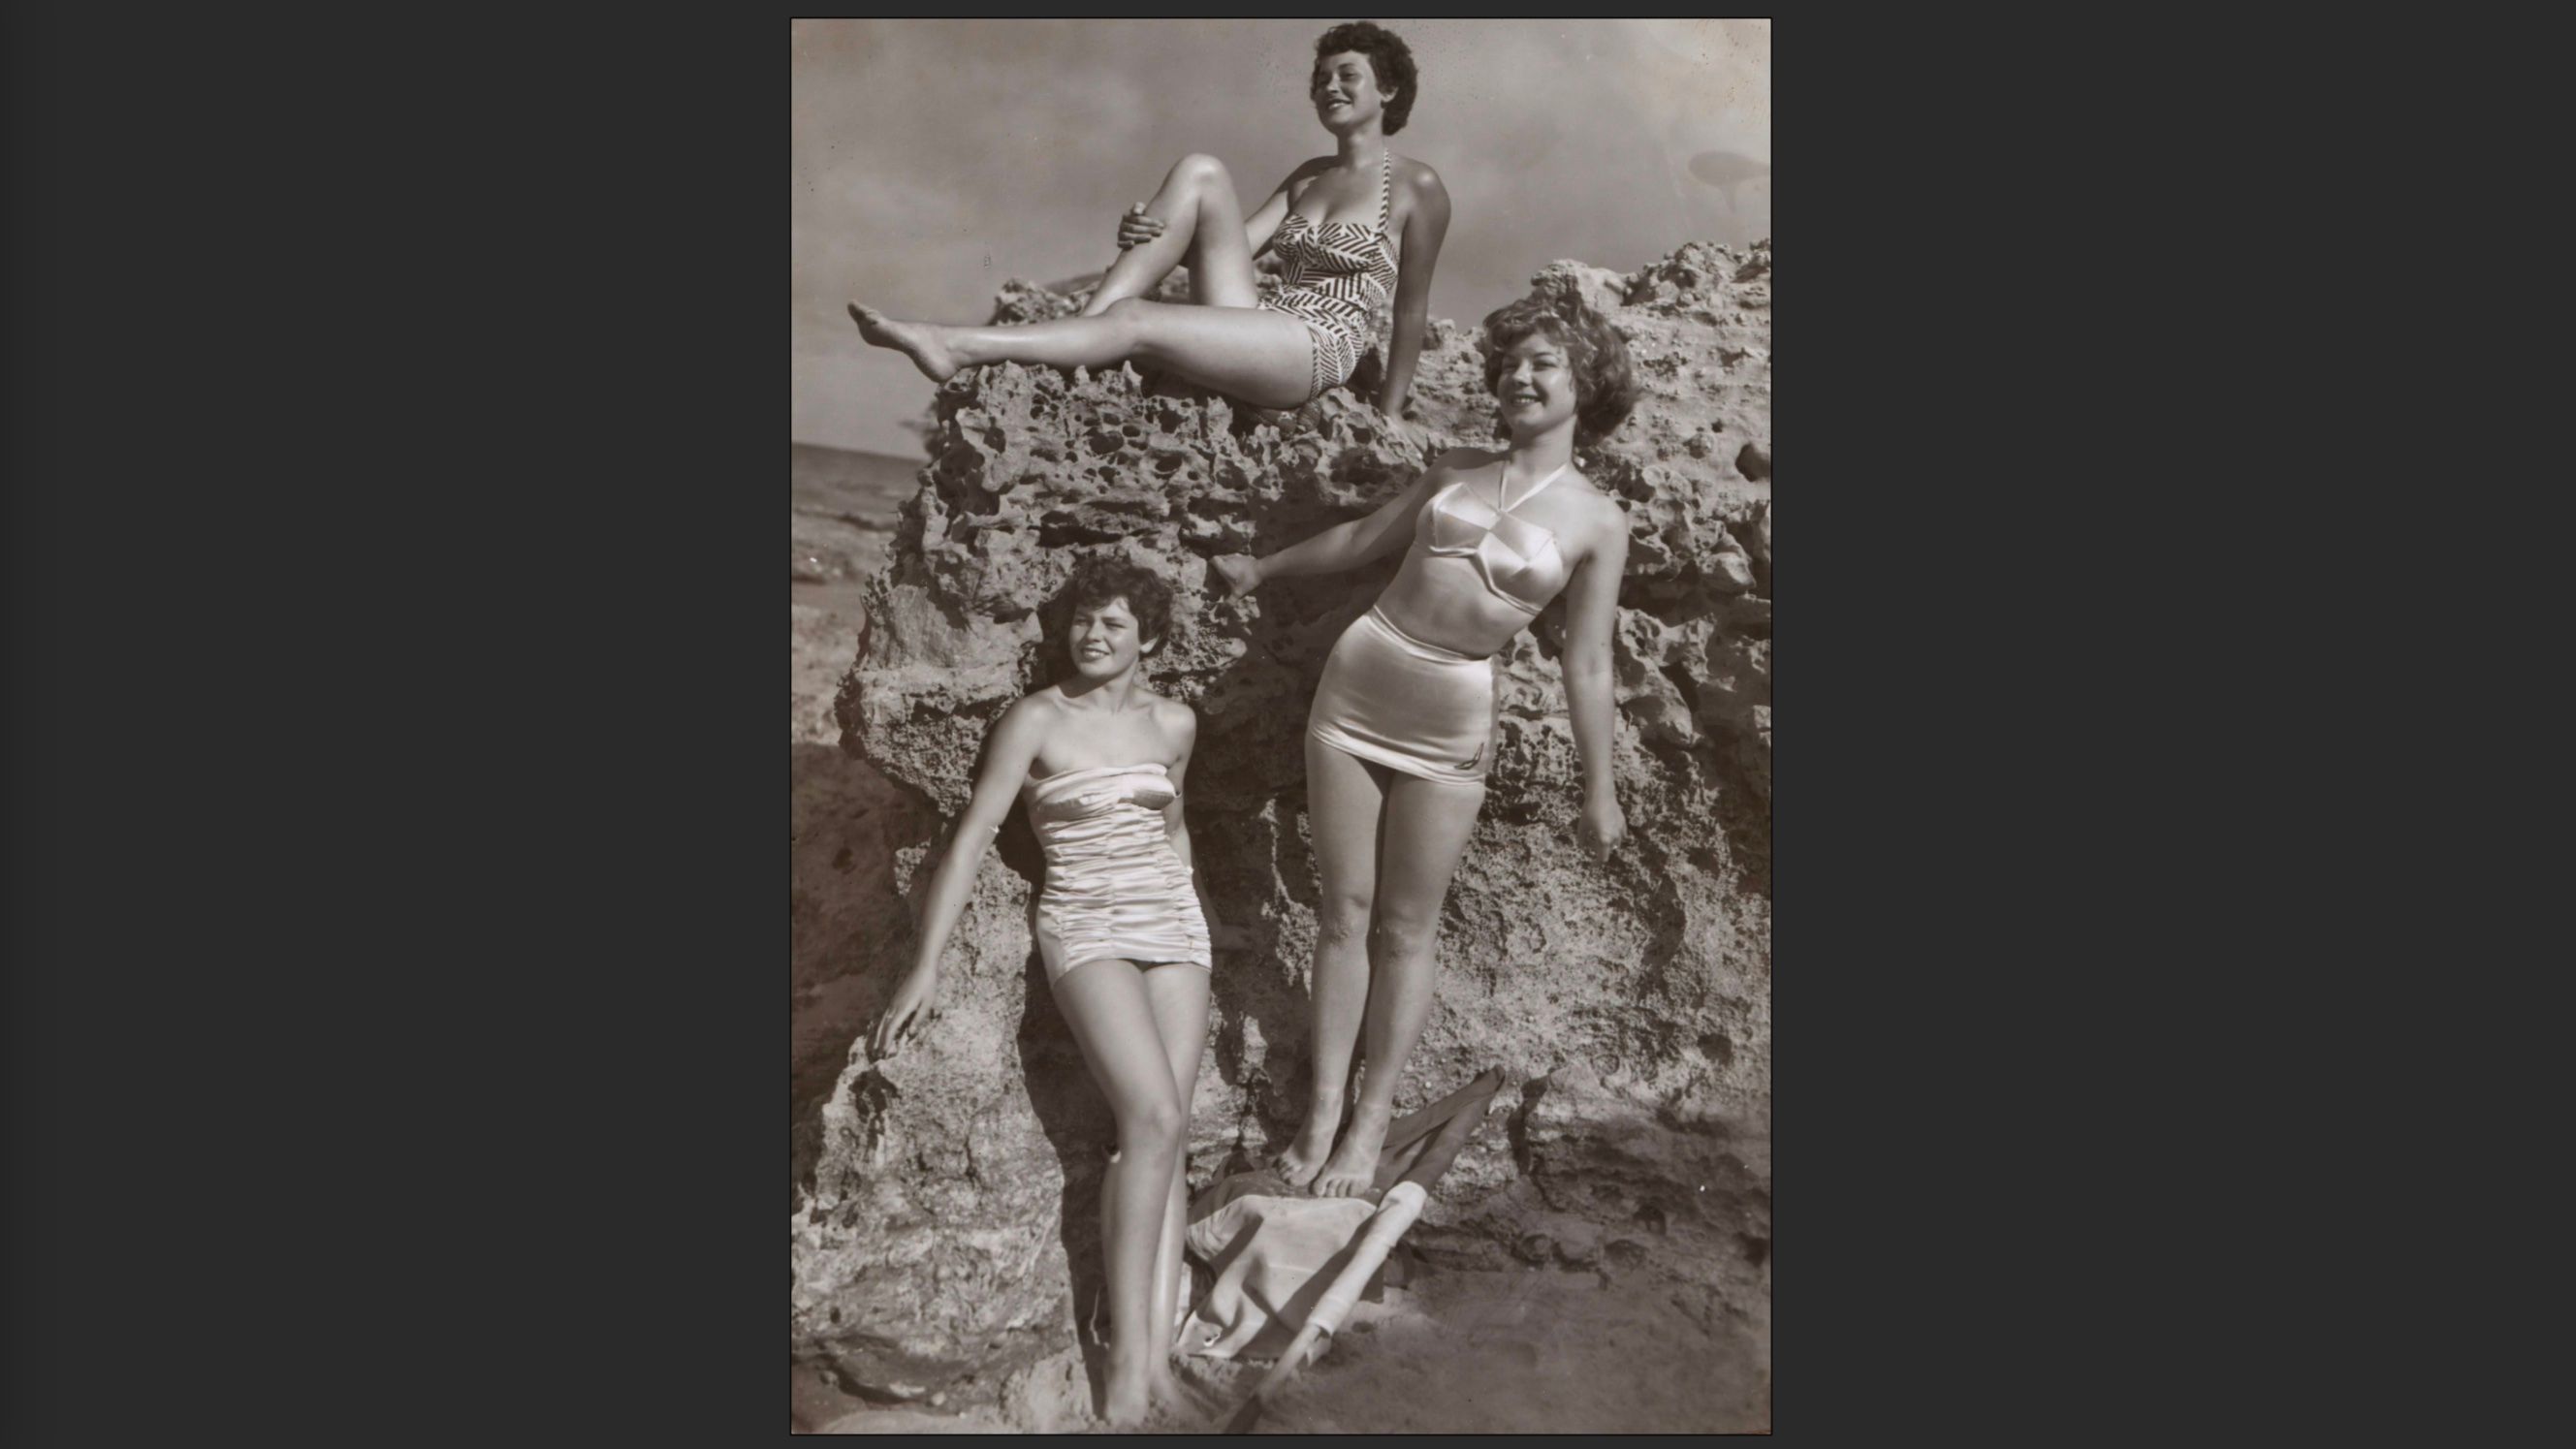 Three woman in bathing suits on a rock, black and white, portrait orientation